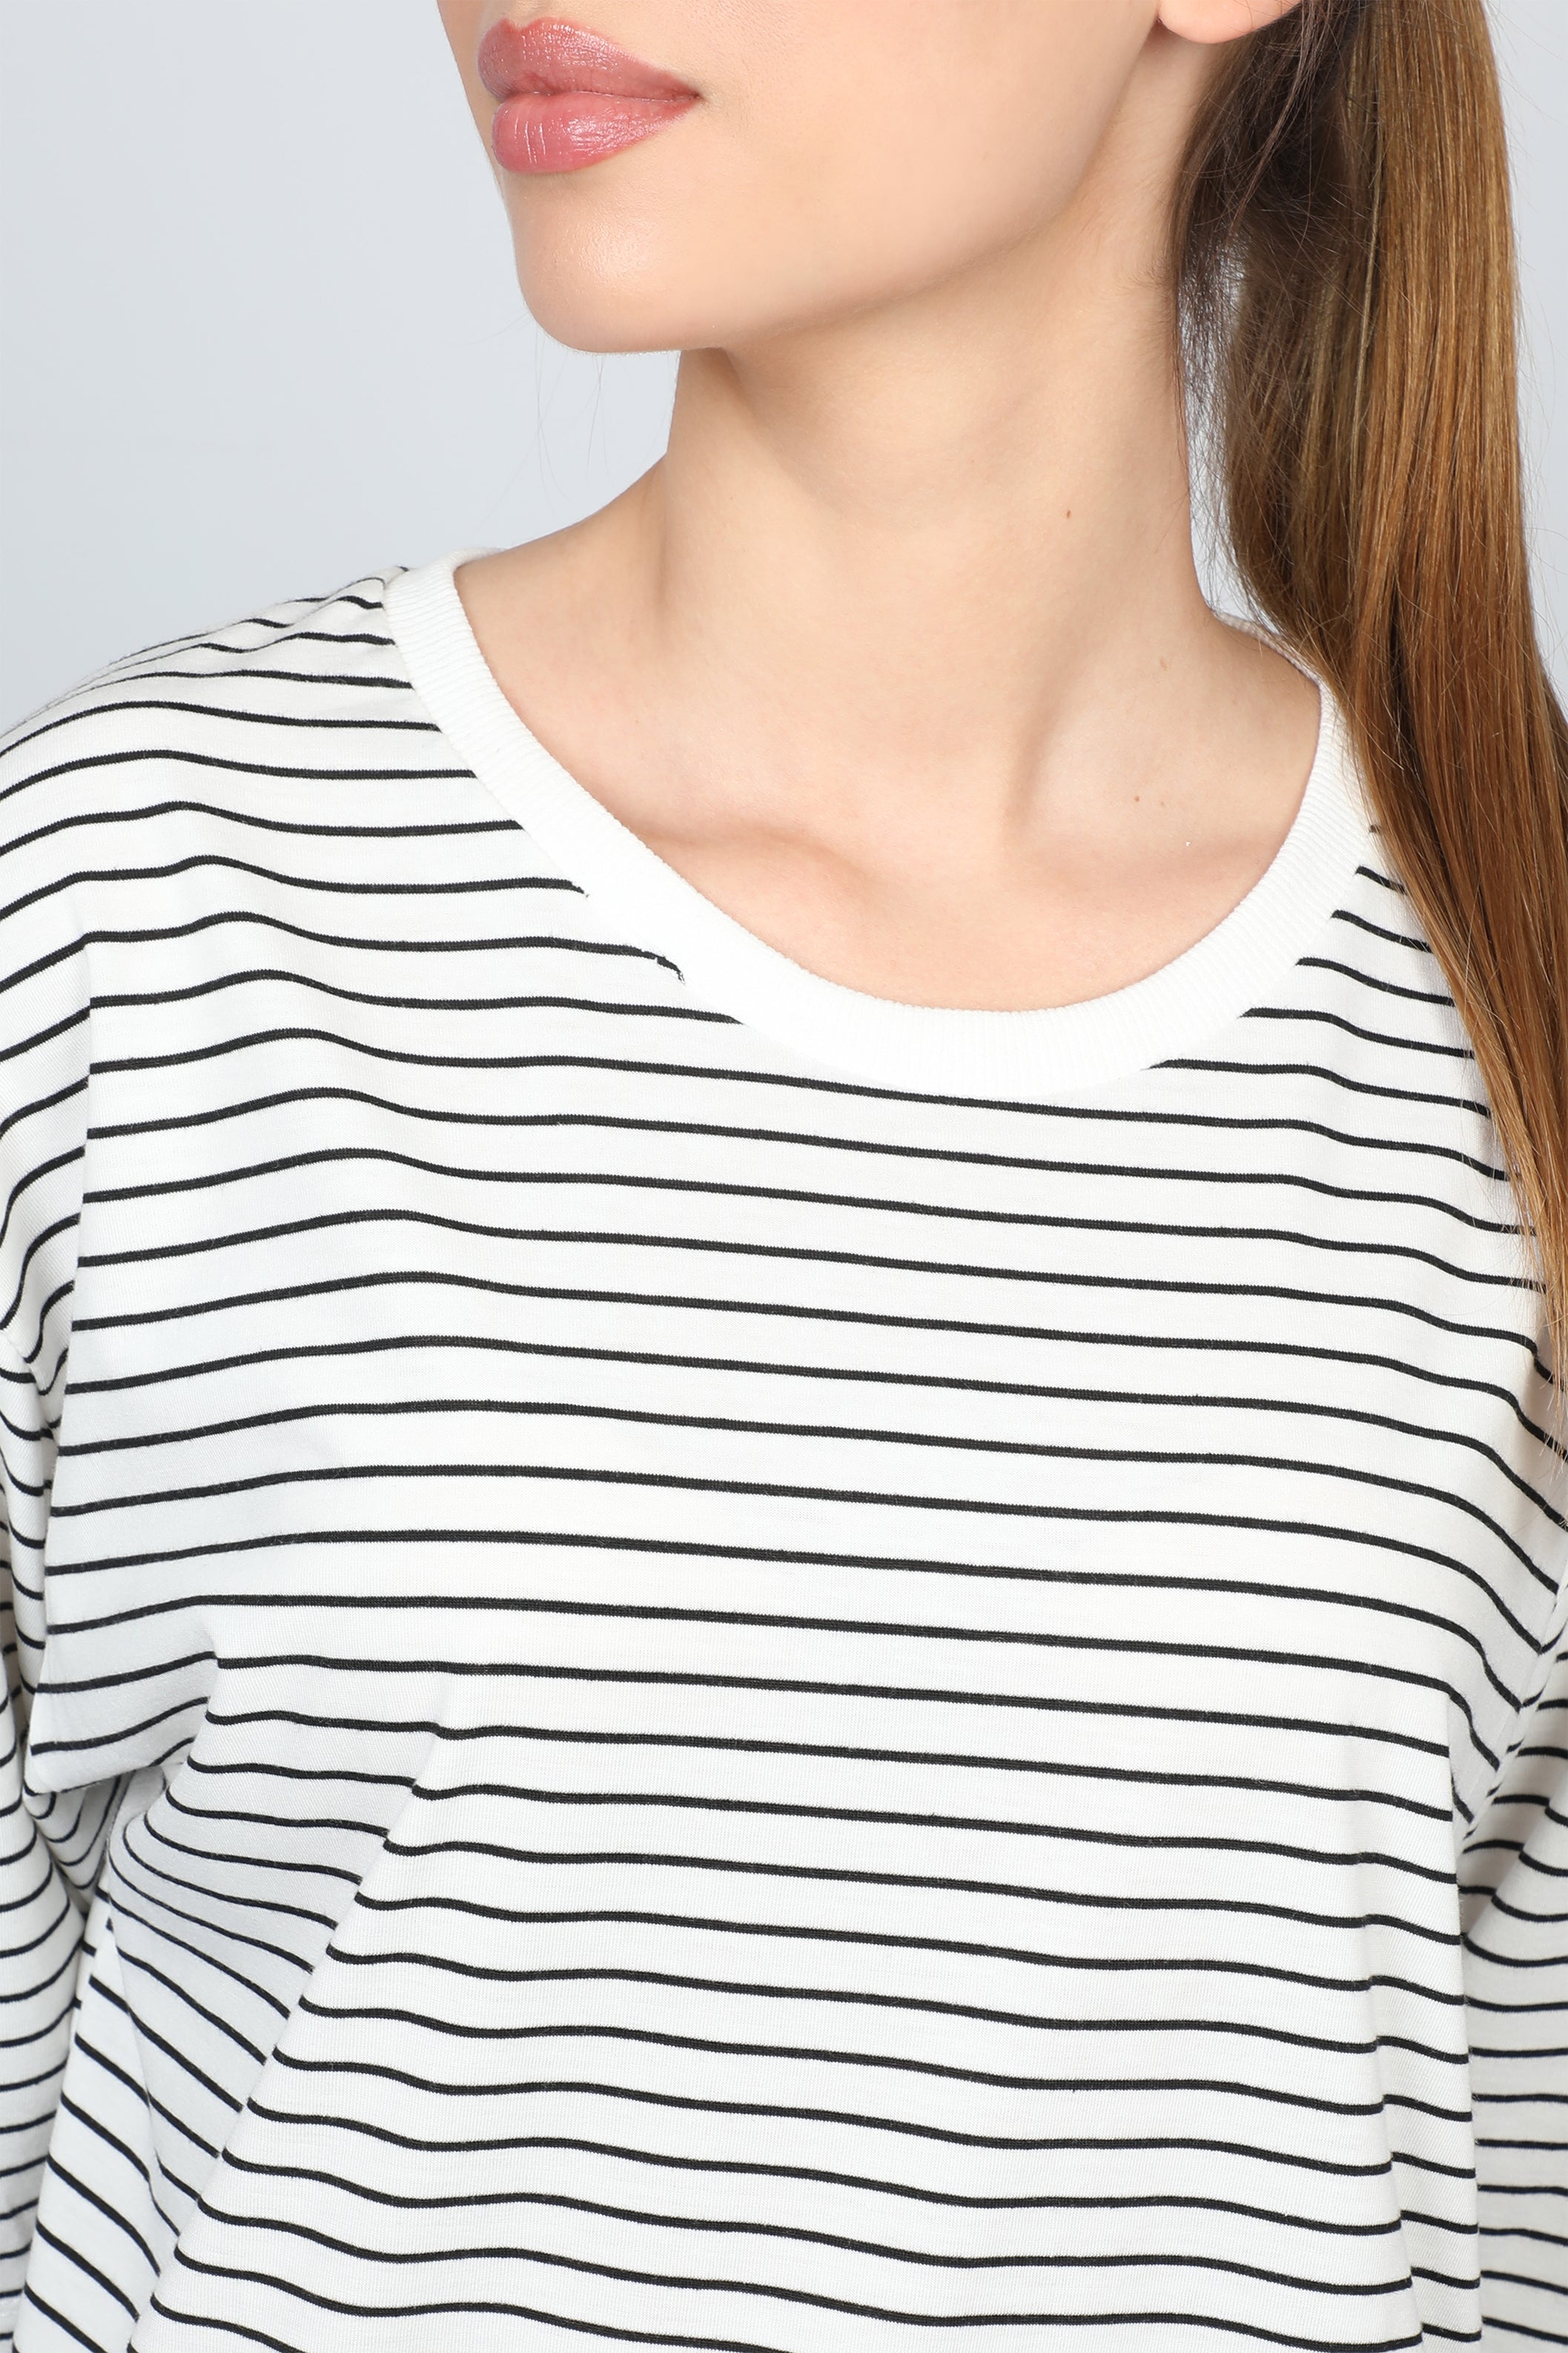 Oversize White Stripe T-shirt With Shirt Style